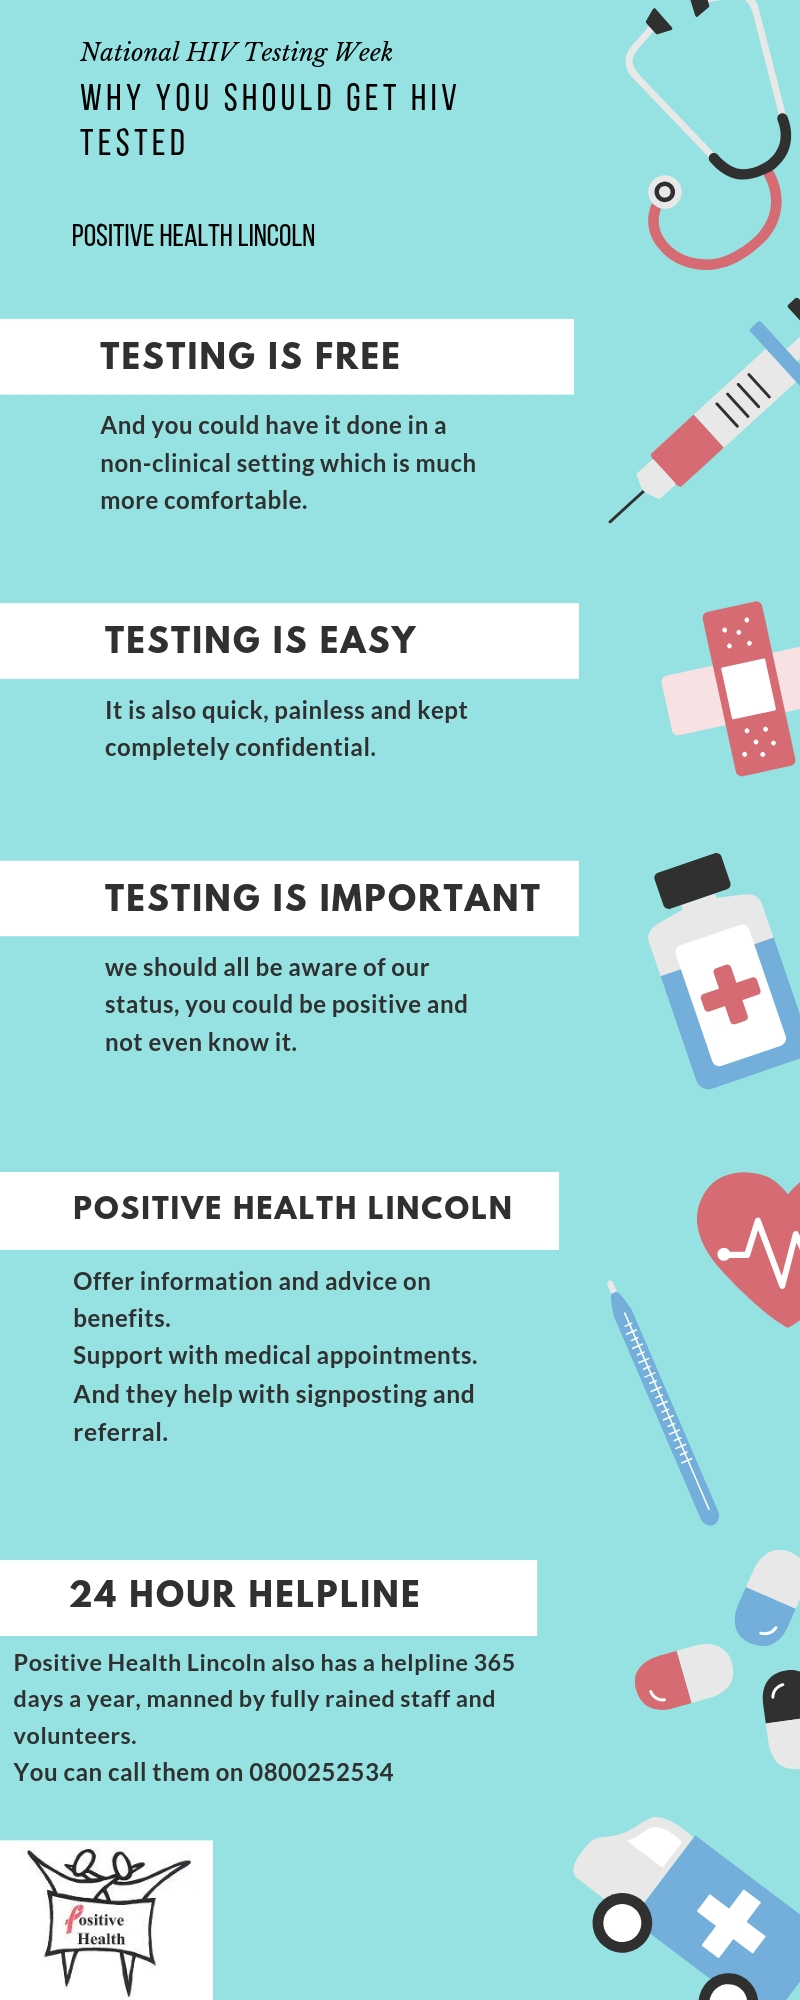 Positive Health Lincoln three reasons why you should get tested.